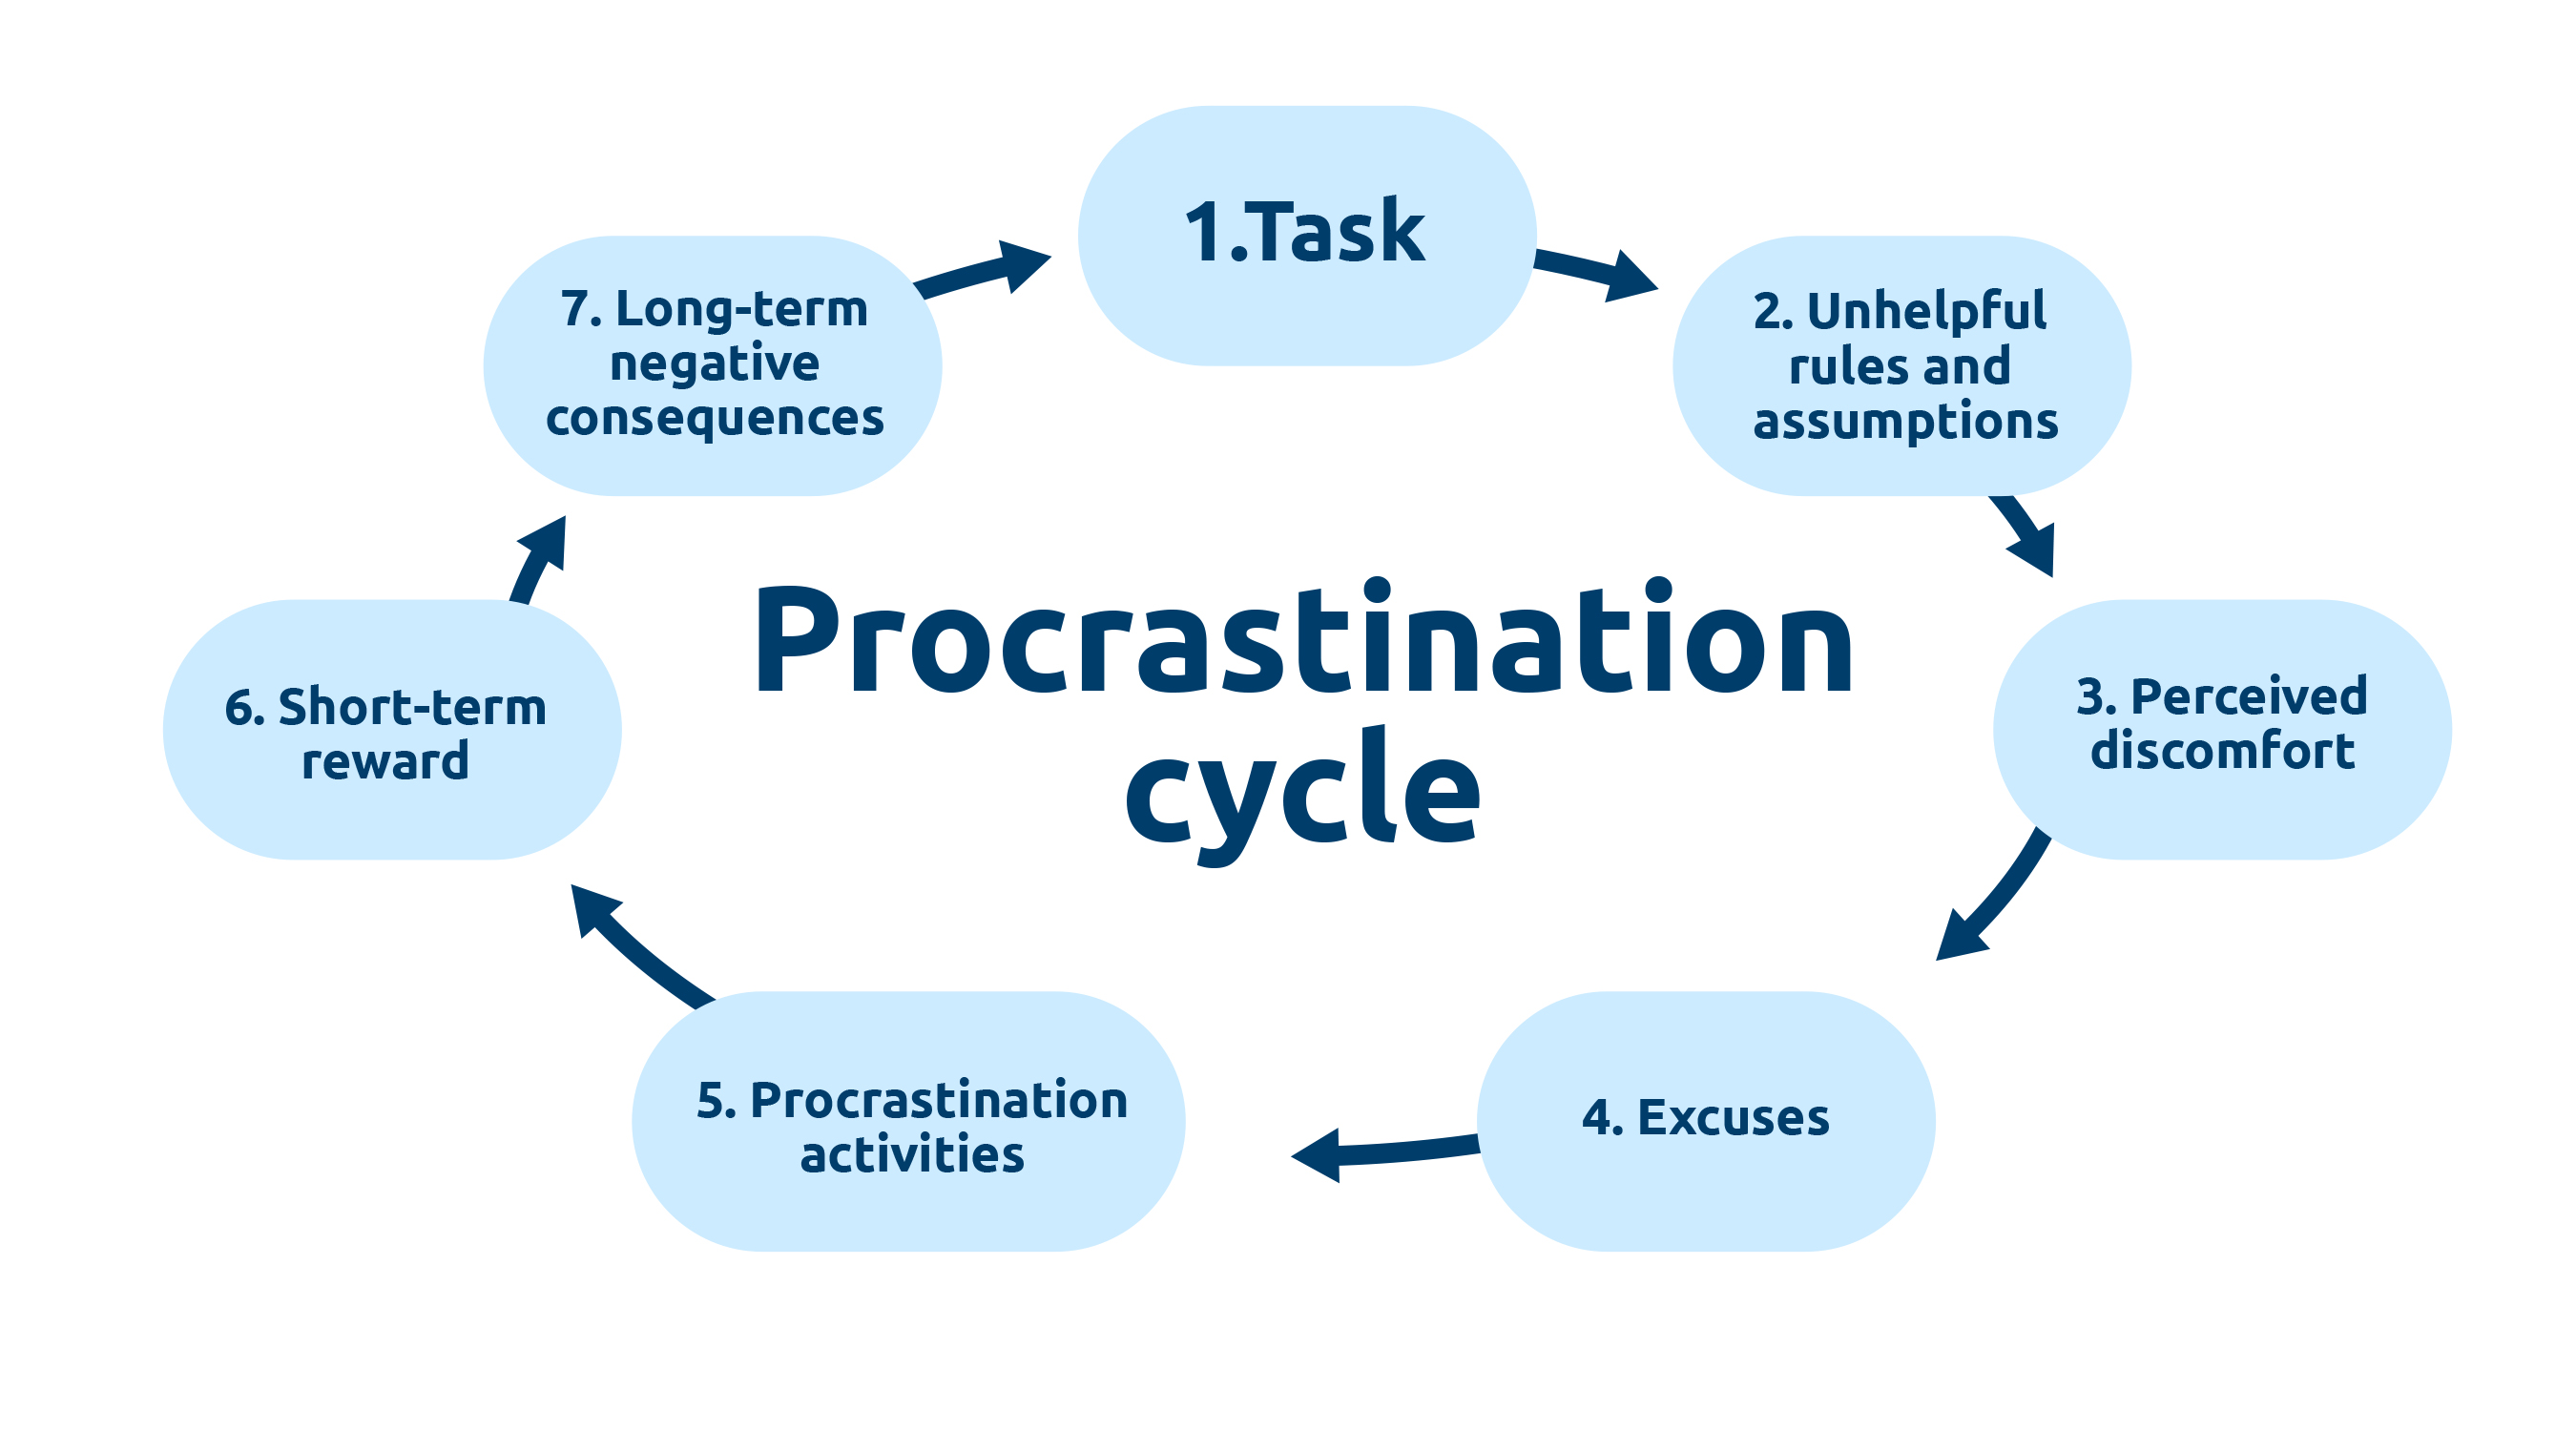 this image shows the procrastination cycle